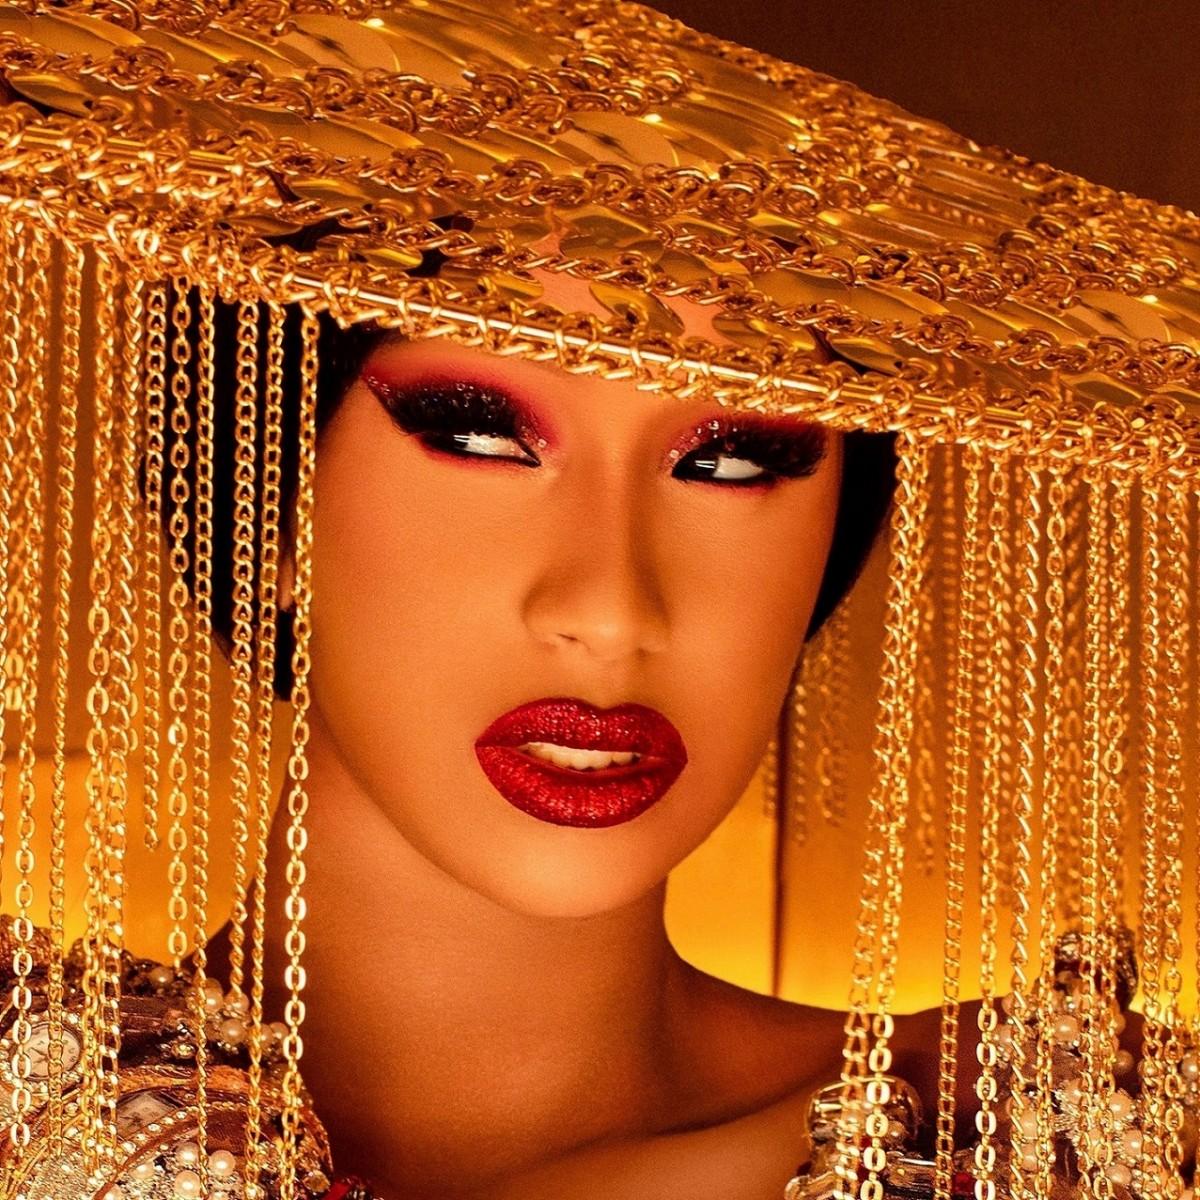 aesthetic cardi b wallpapers wallpaper cave on aesthetic cardi b wallpapers